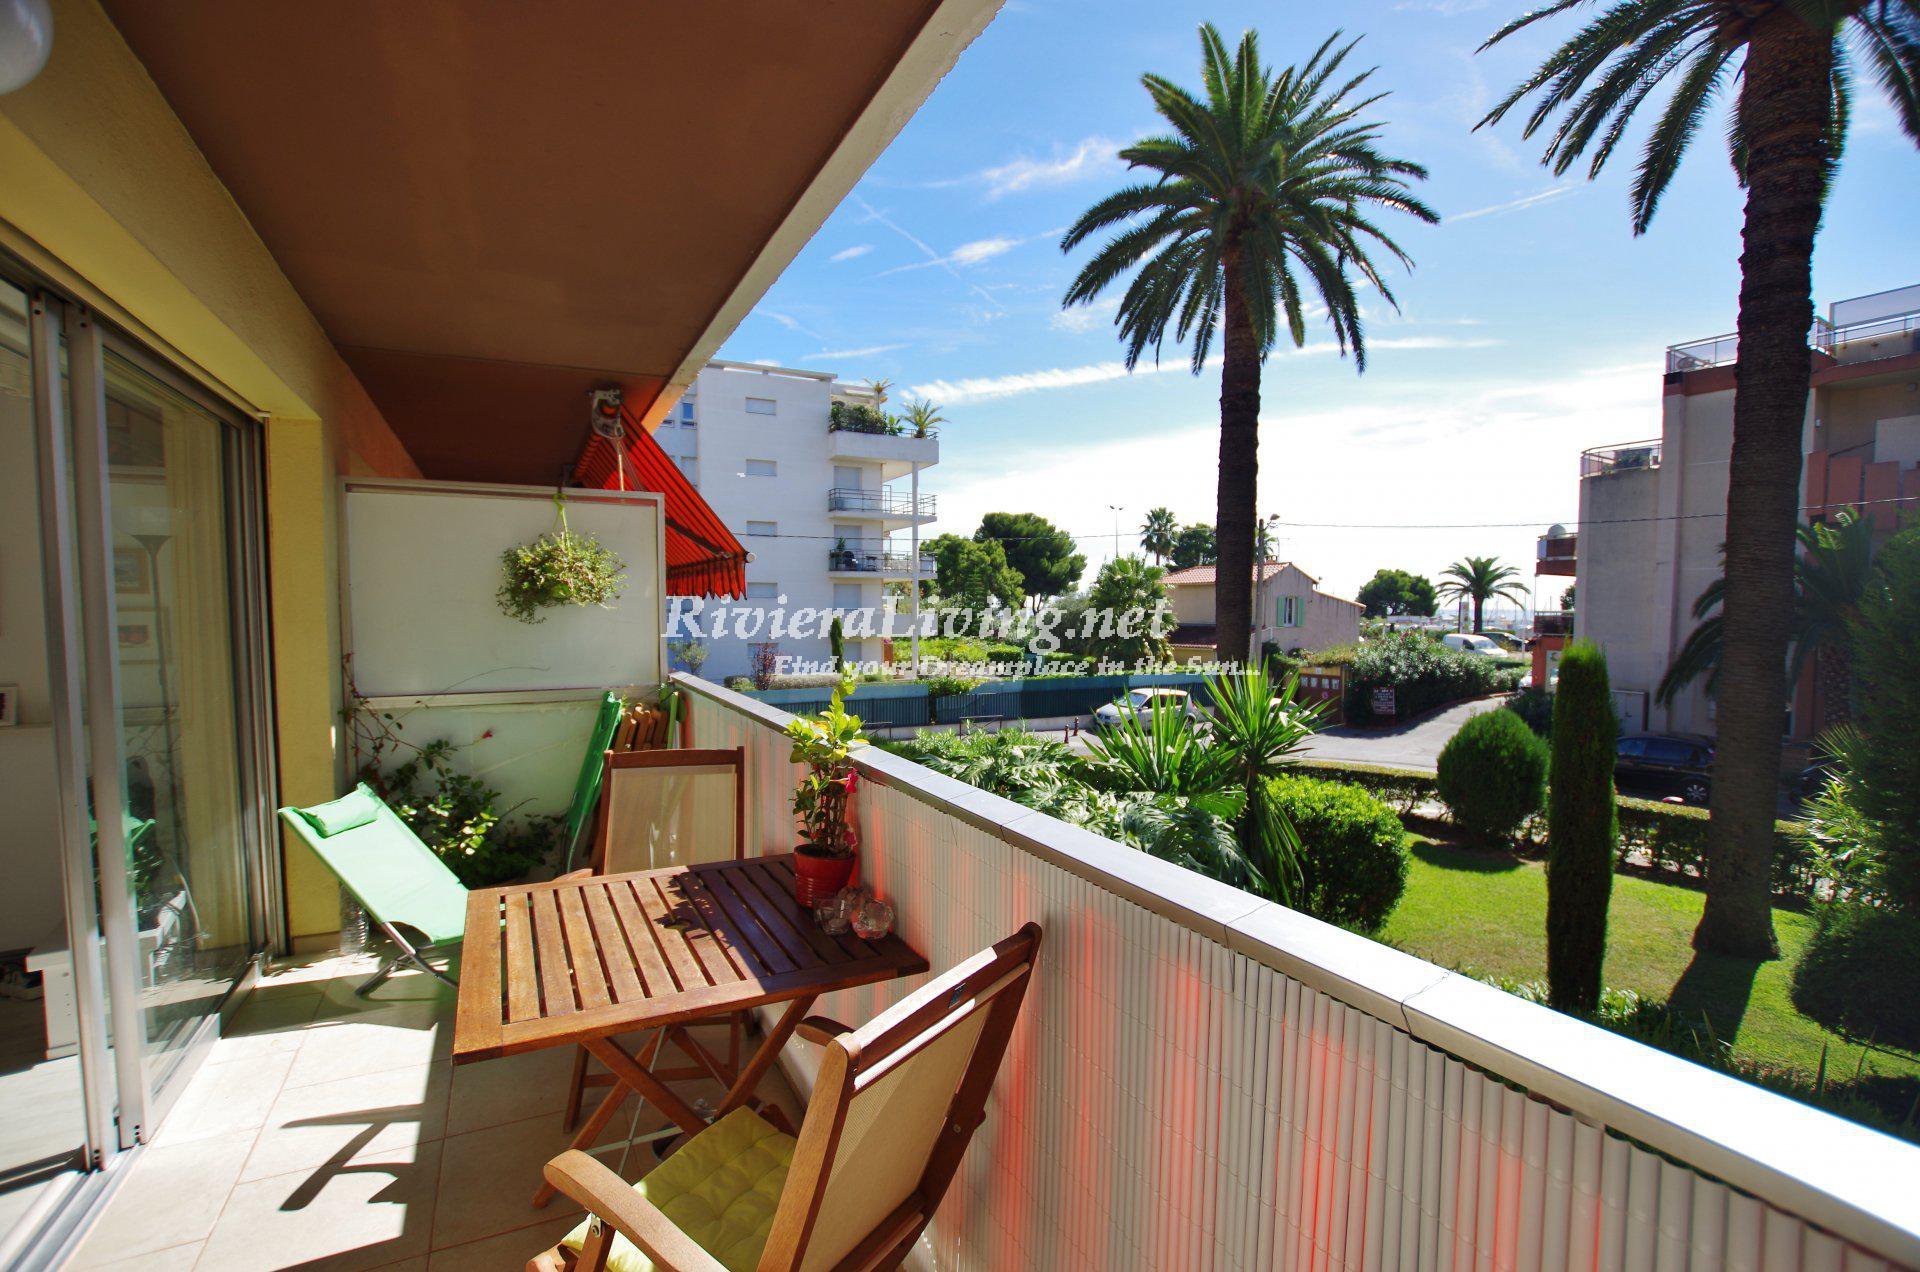 Perfect location, only 100 meters from the sea and the marina, for this one bedroom apartment with pool and large terrace.